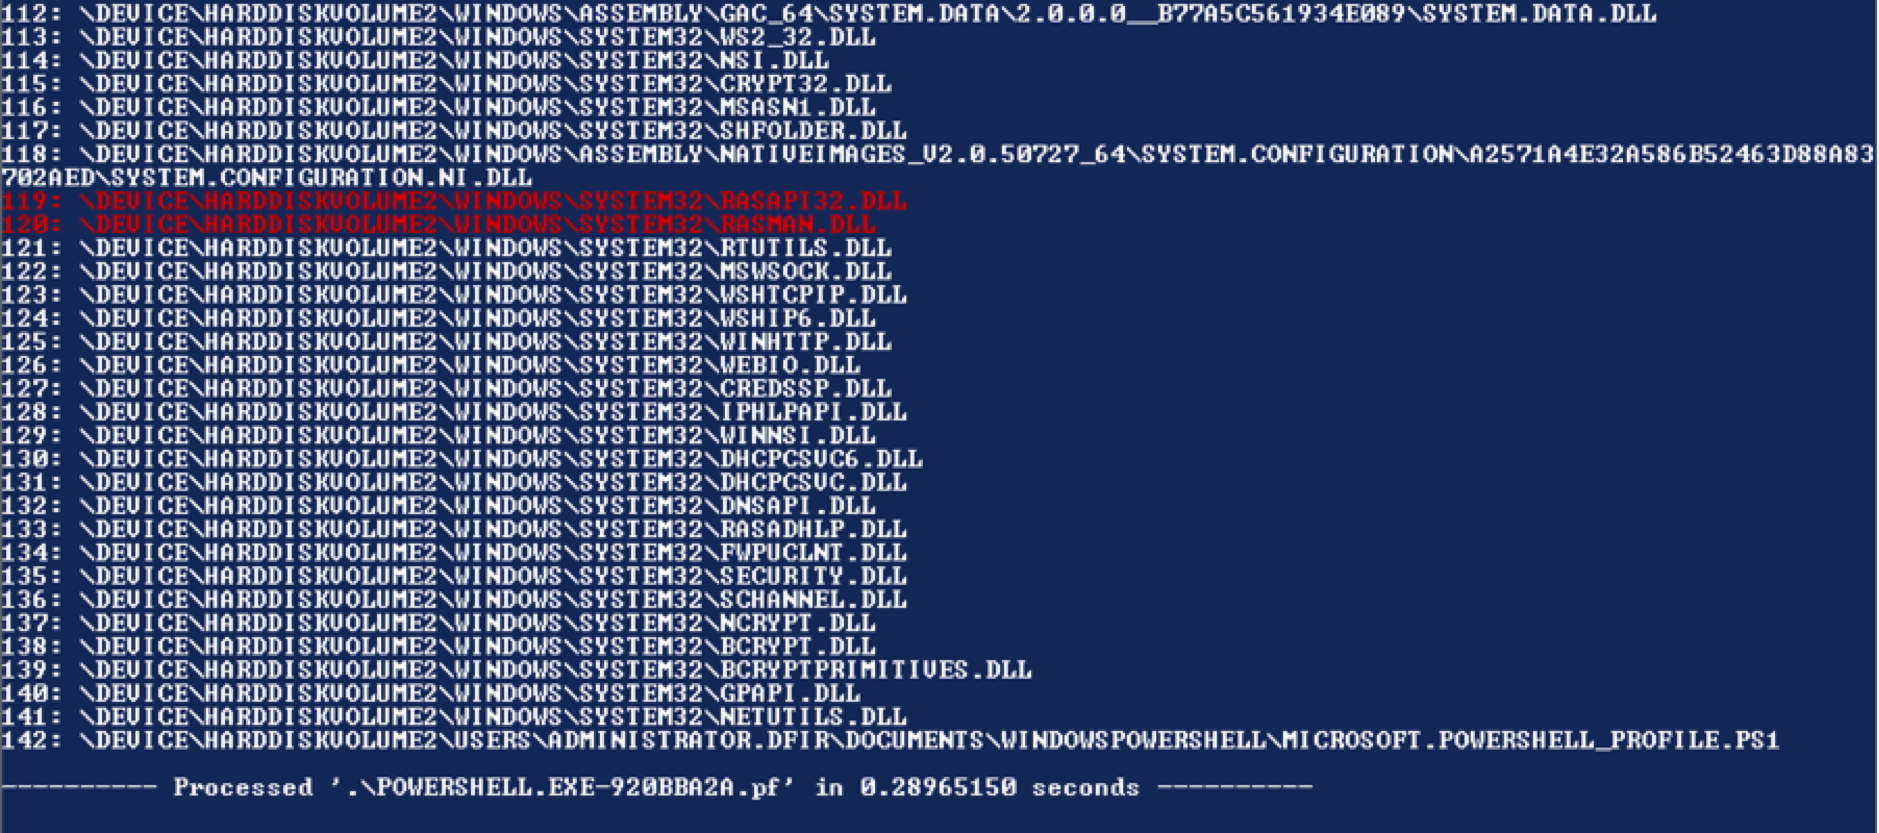 Evidence of Execution - Powershell Webclient method